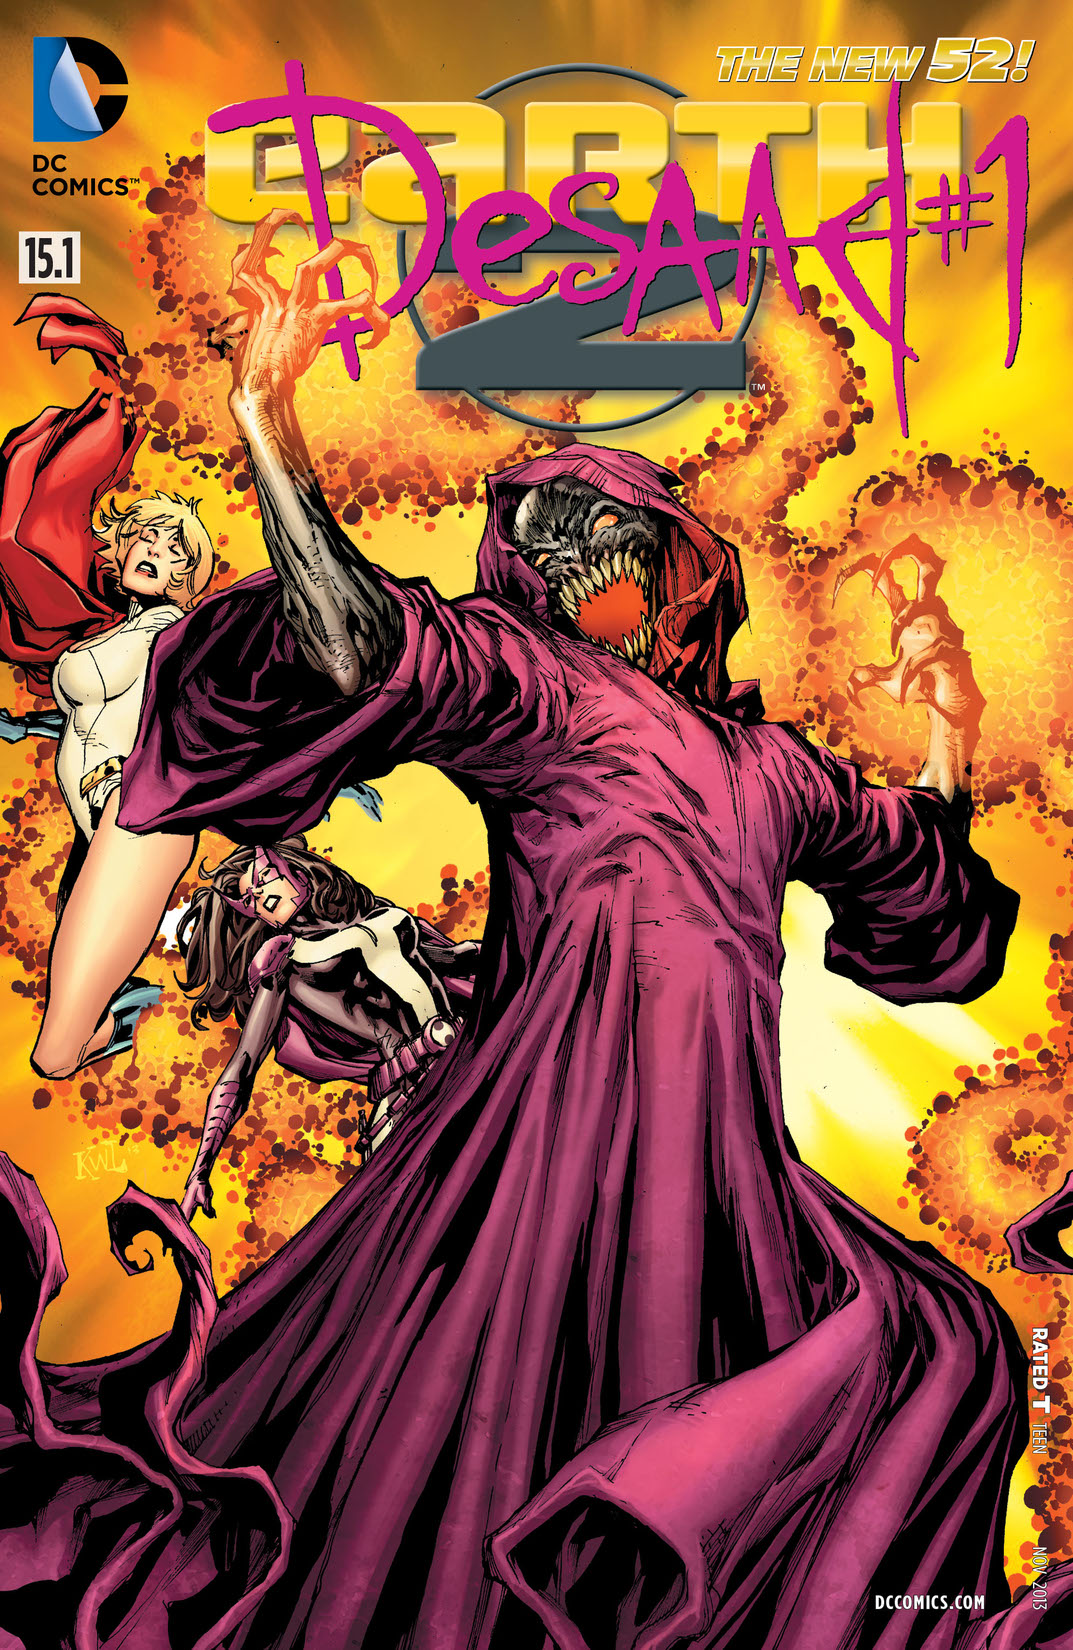 Earth 2 feat Desaad #15.1 preview images